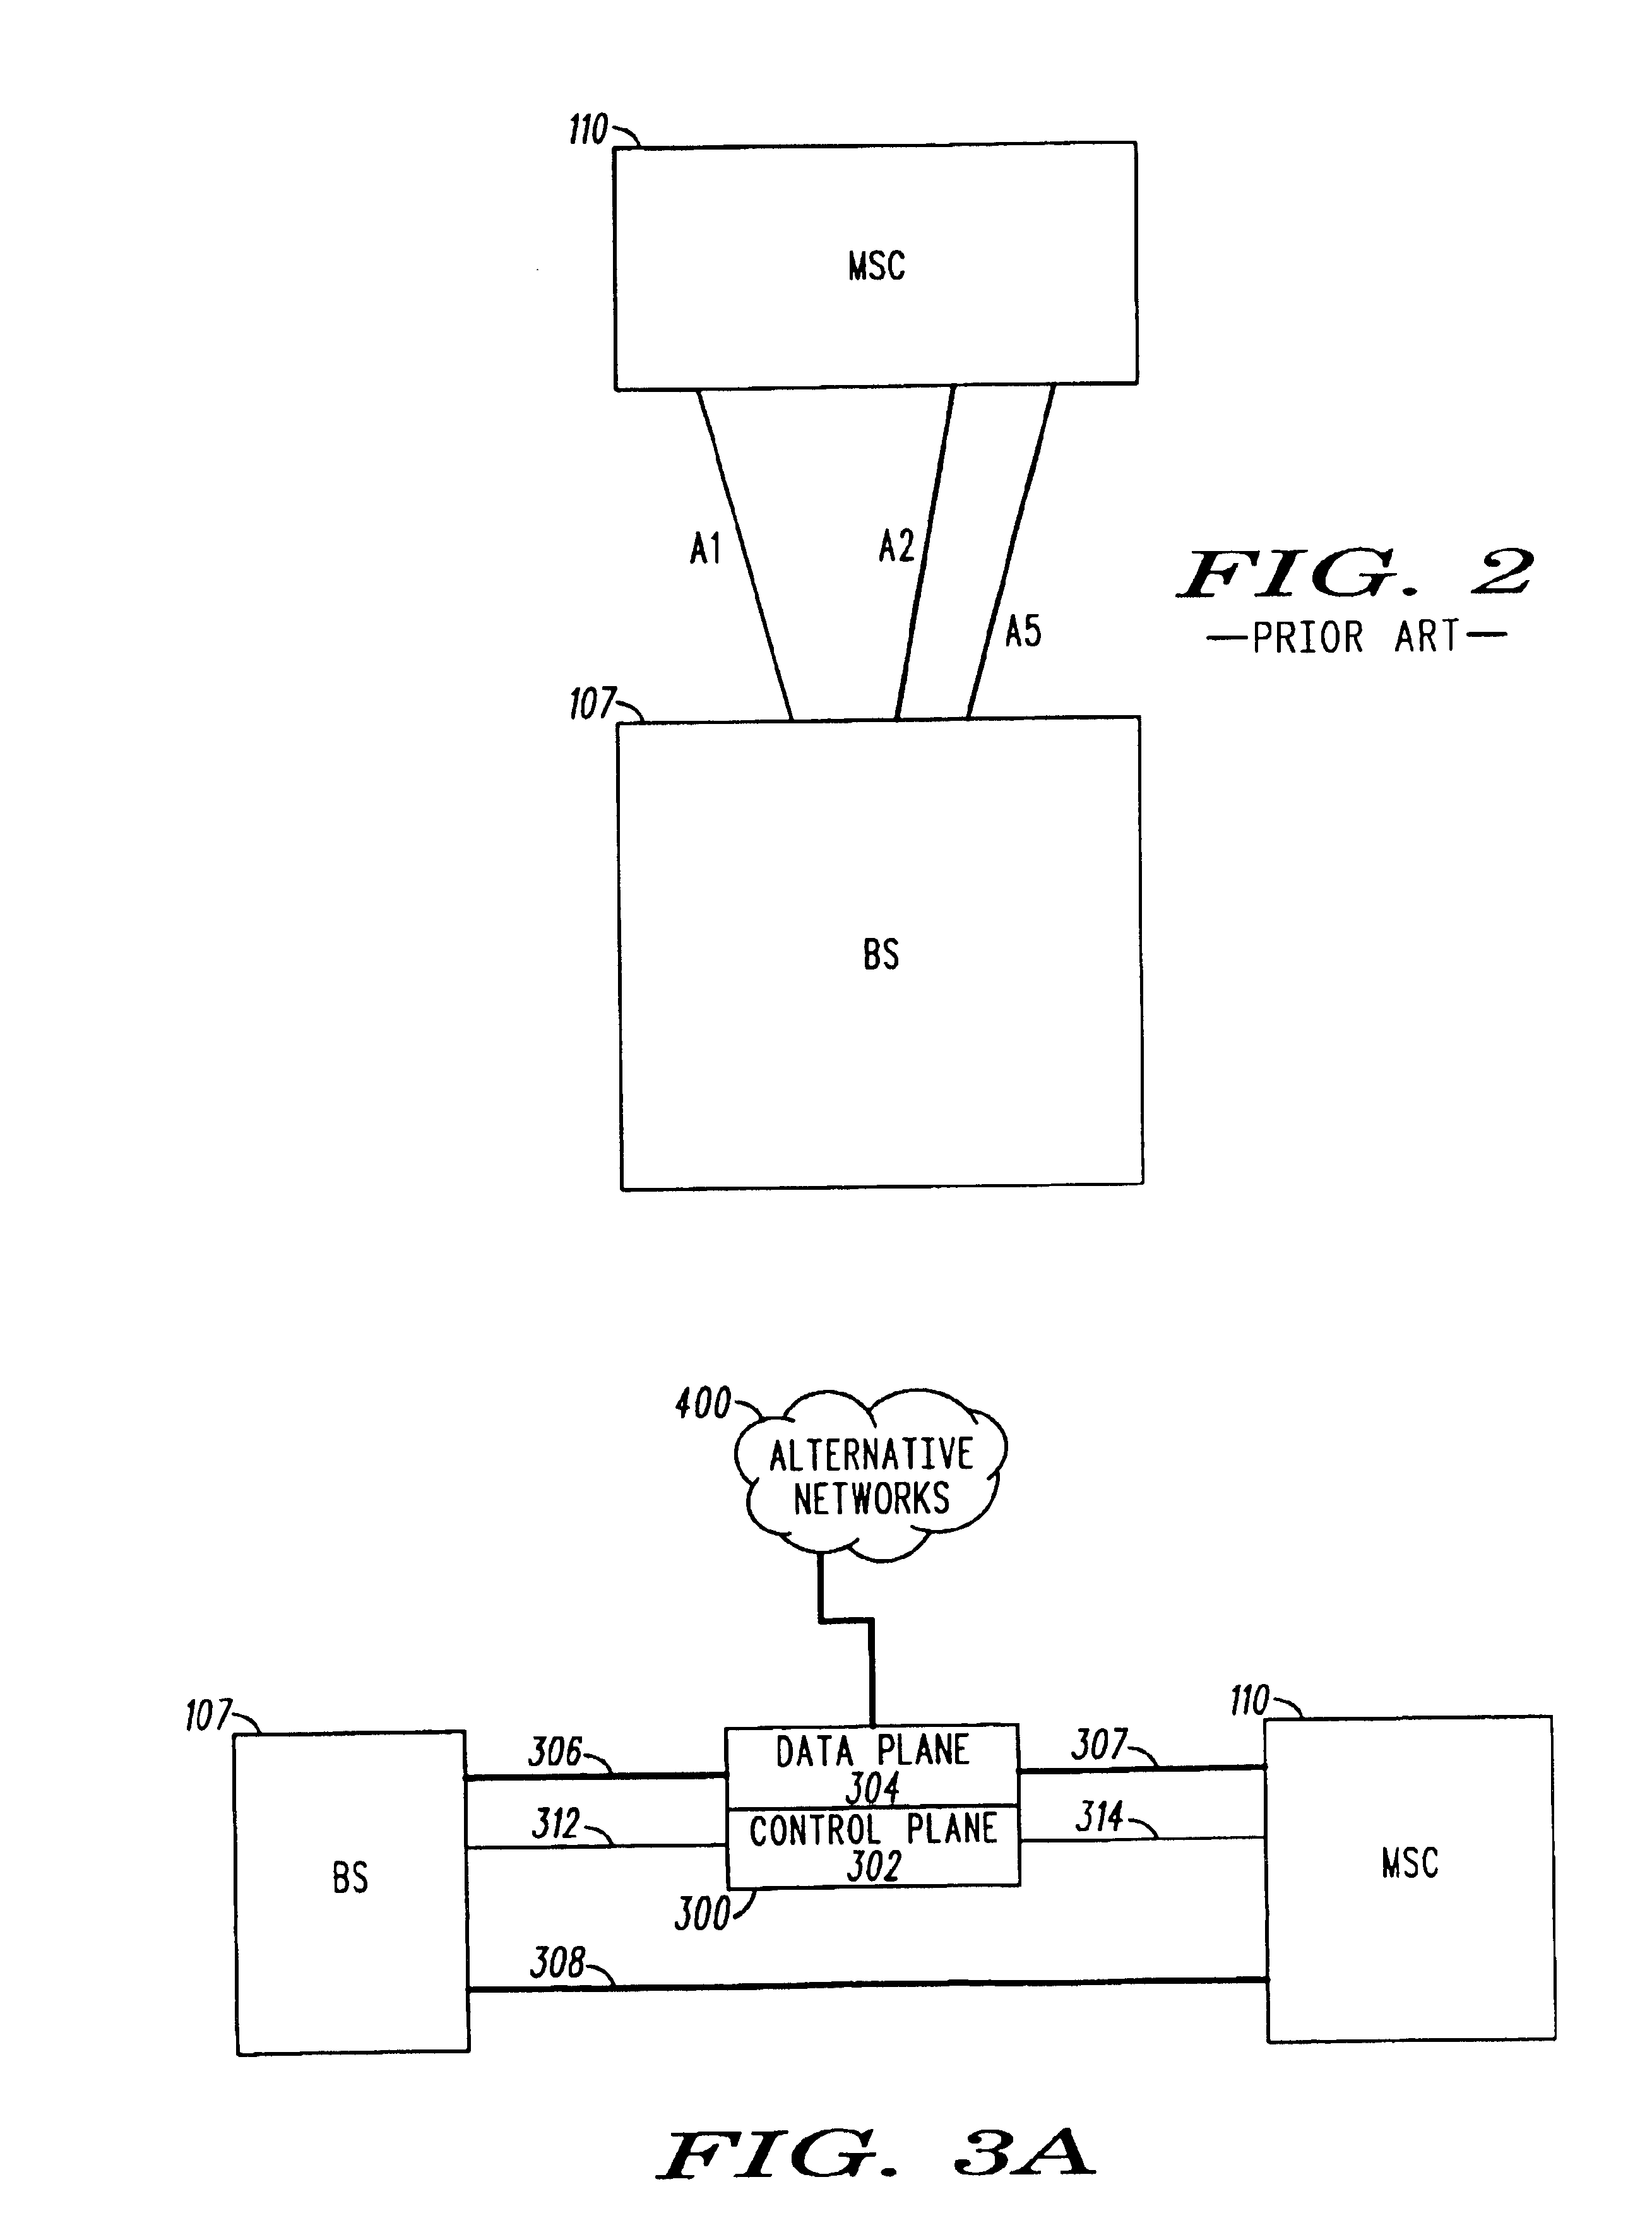 System and method of servicing mobile communications with a proxy switch